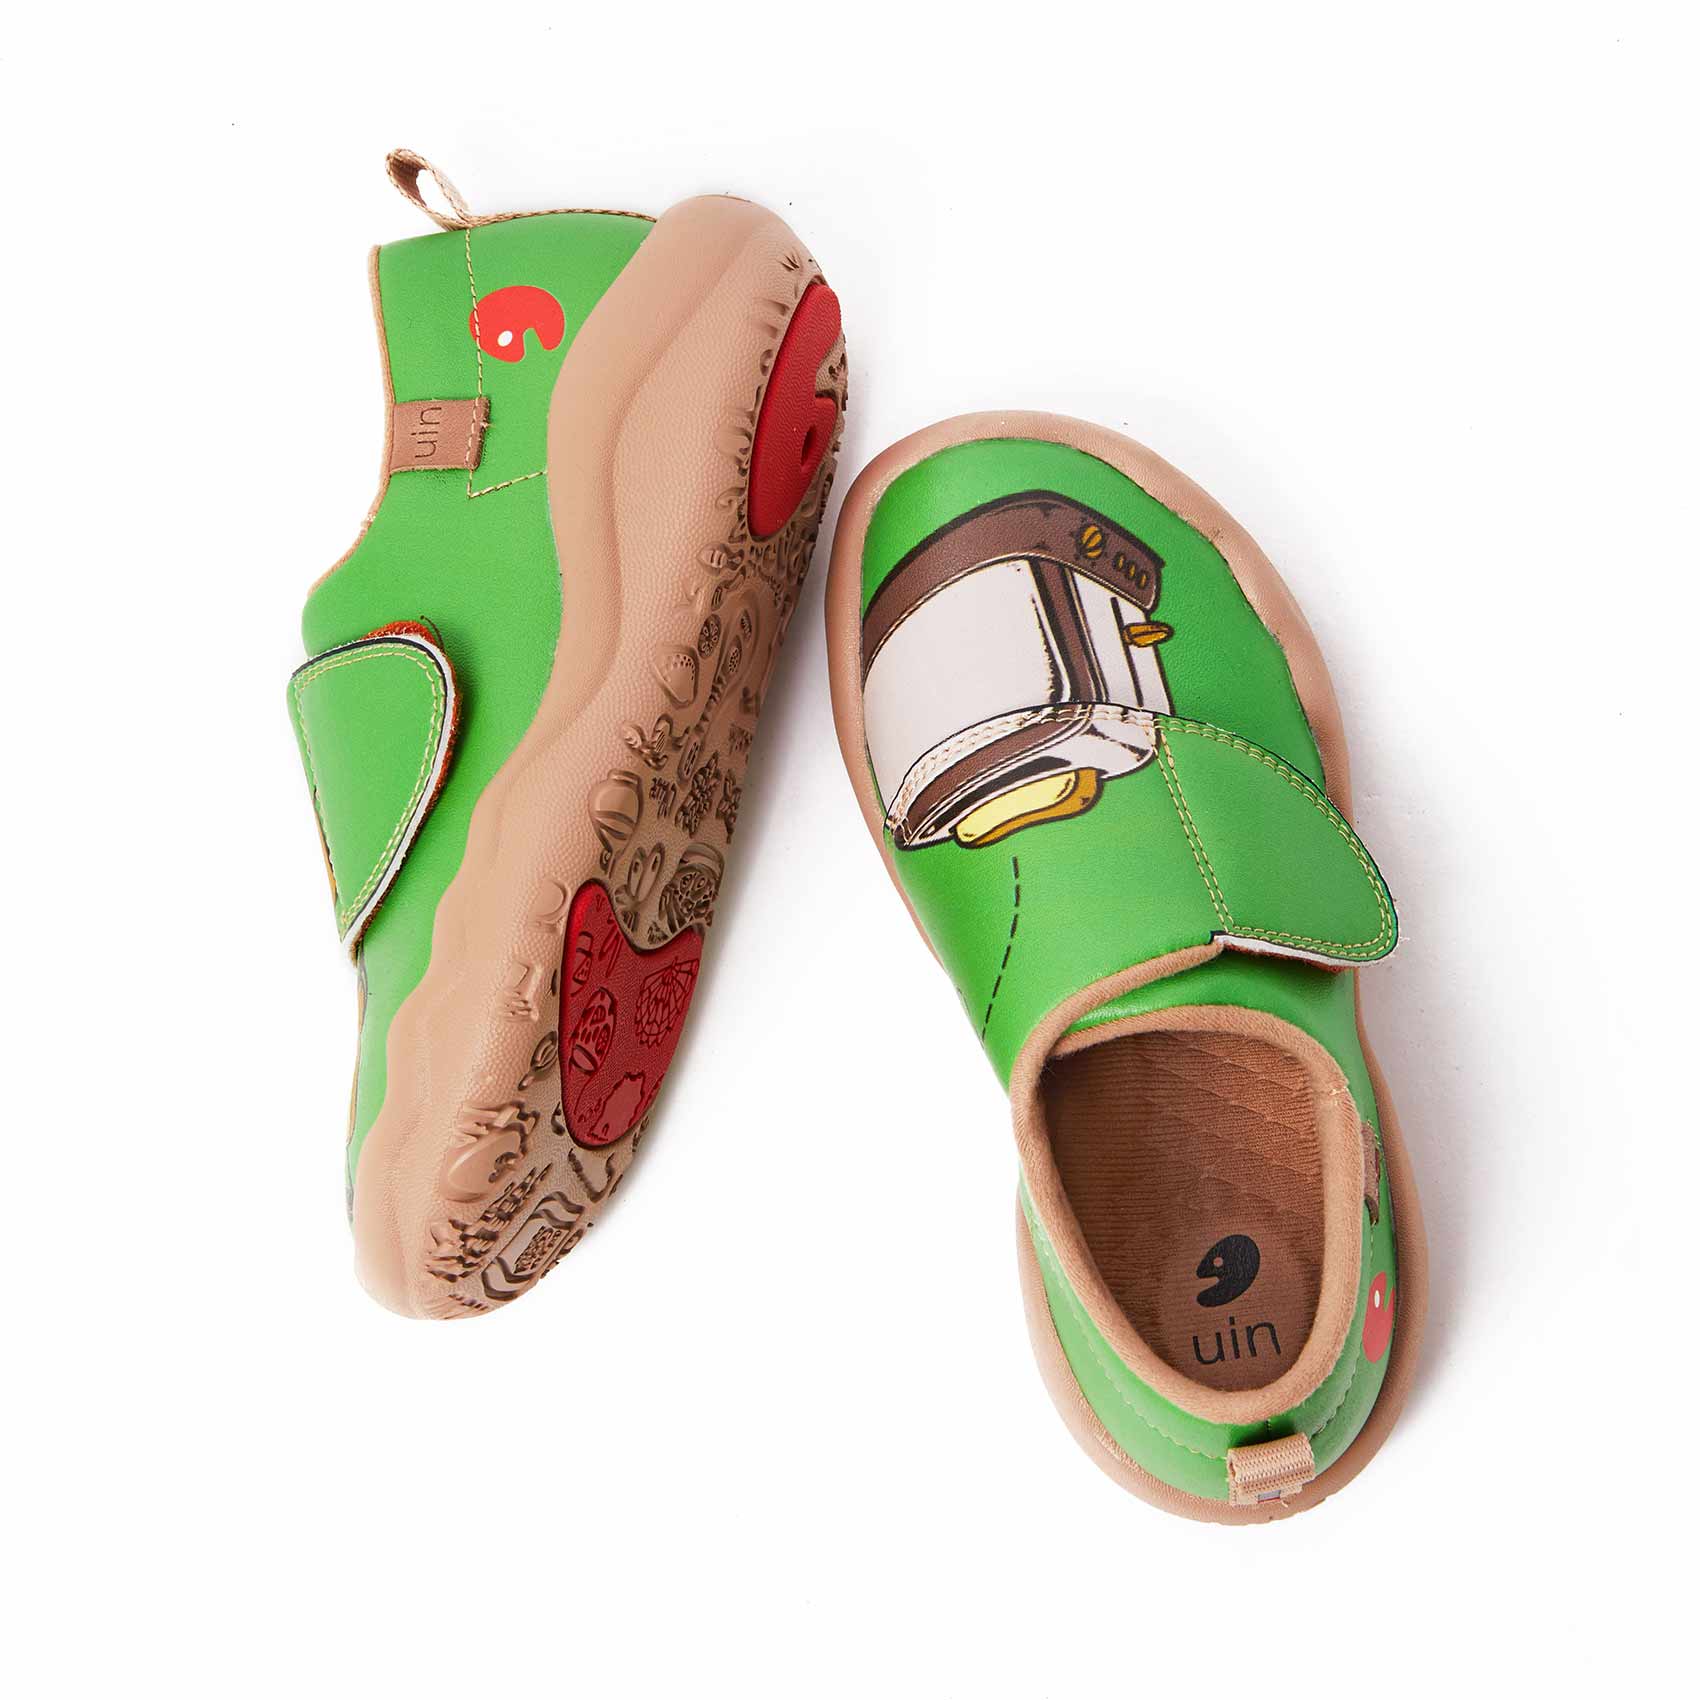 UIN Footwear Kid You Jump Kid Canvas loafers